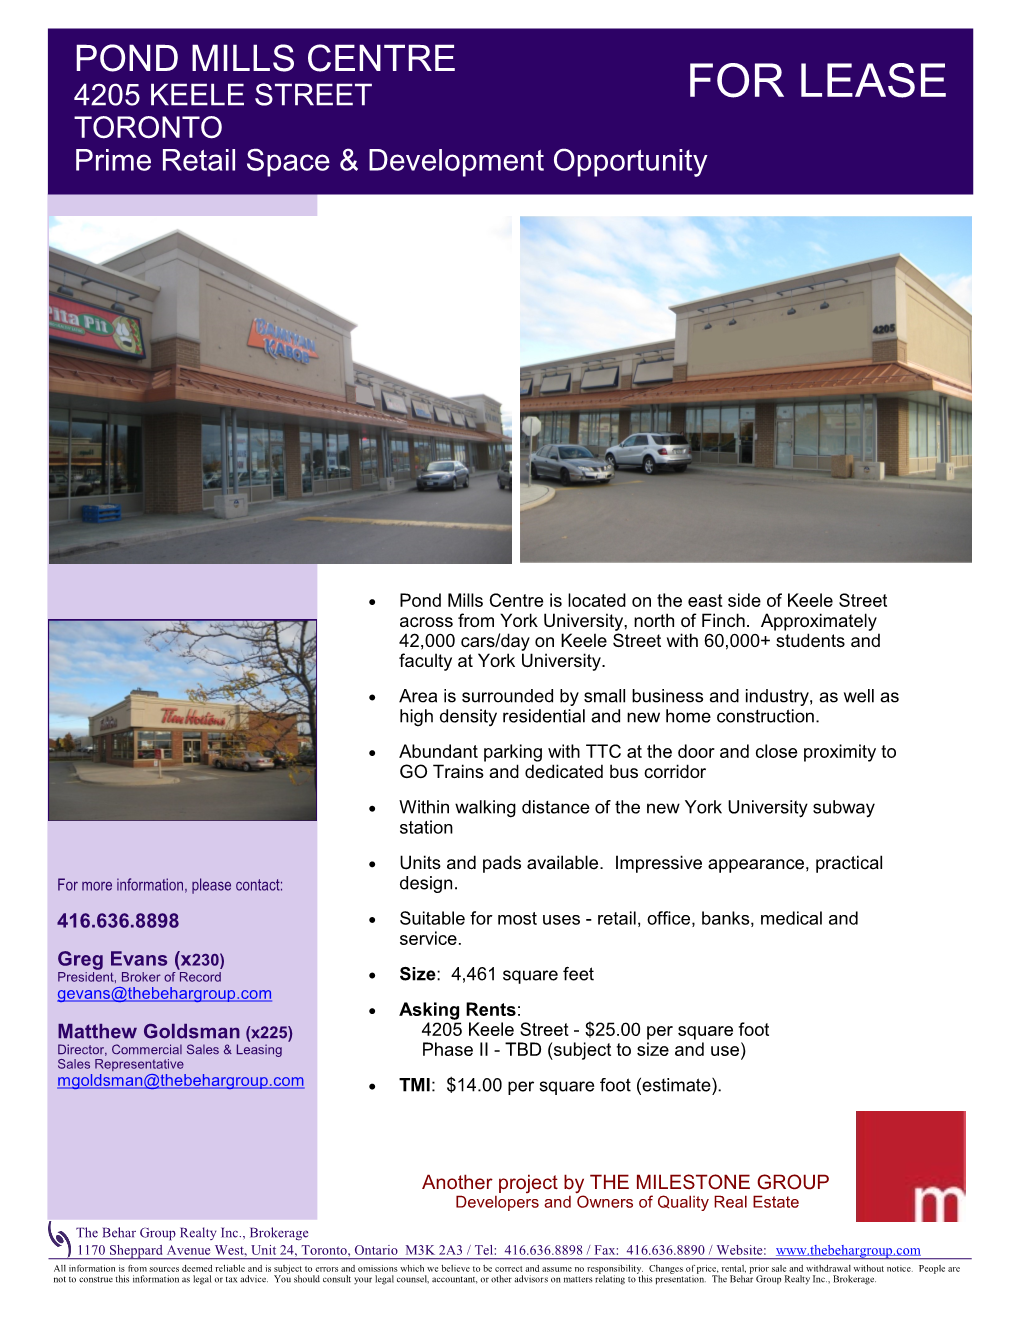 POND MILLS CENTRE 4205 KEELE STREET for LEASE TORONTO Prime Retail Space & Development Opportunity